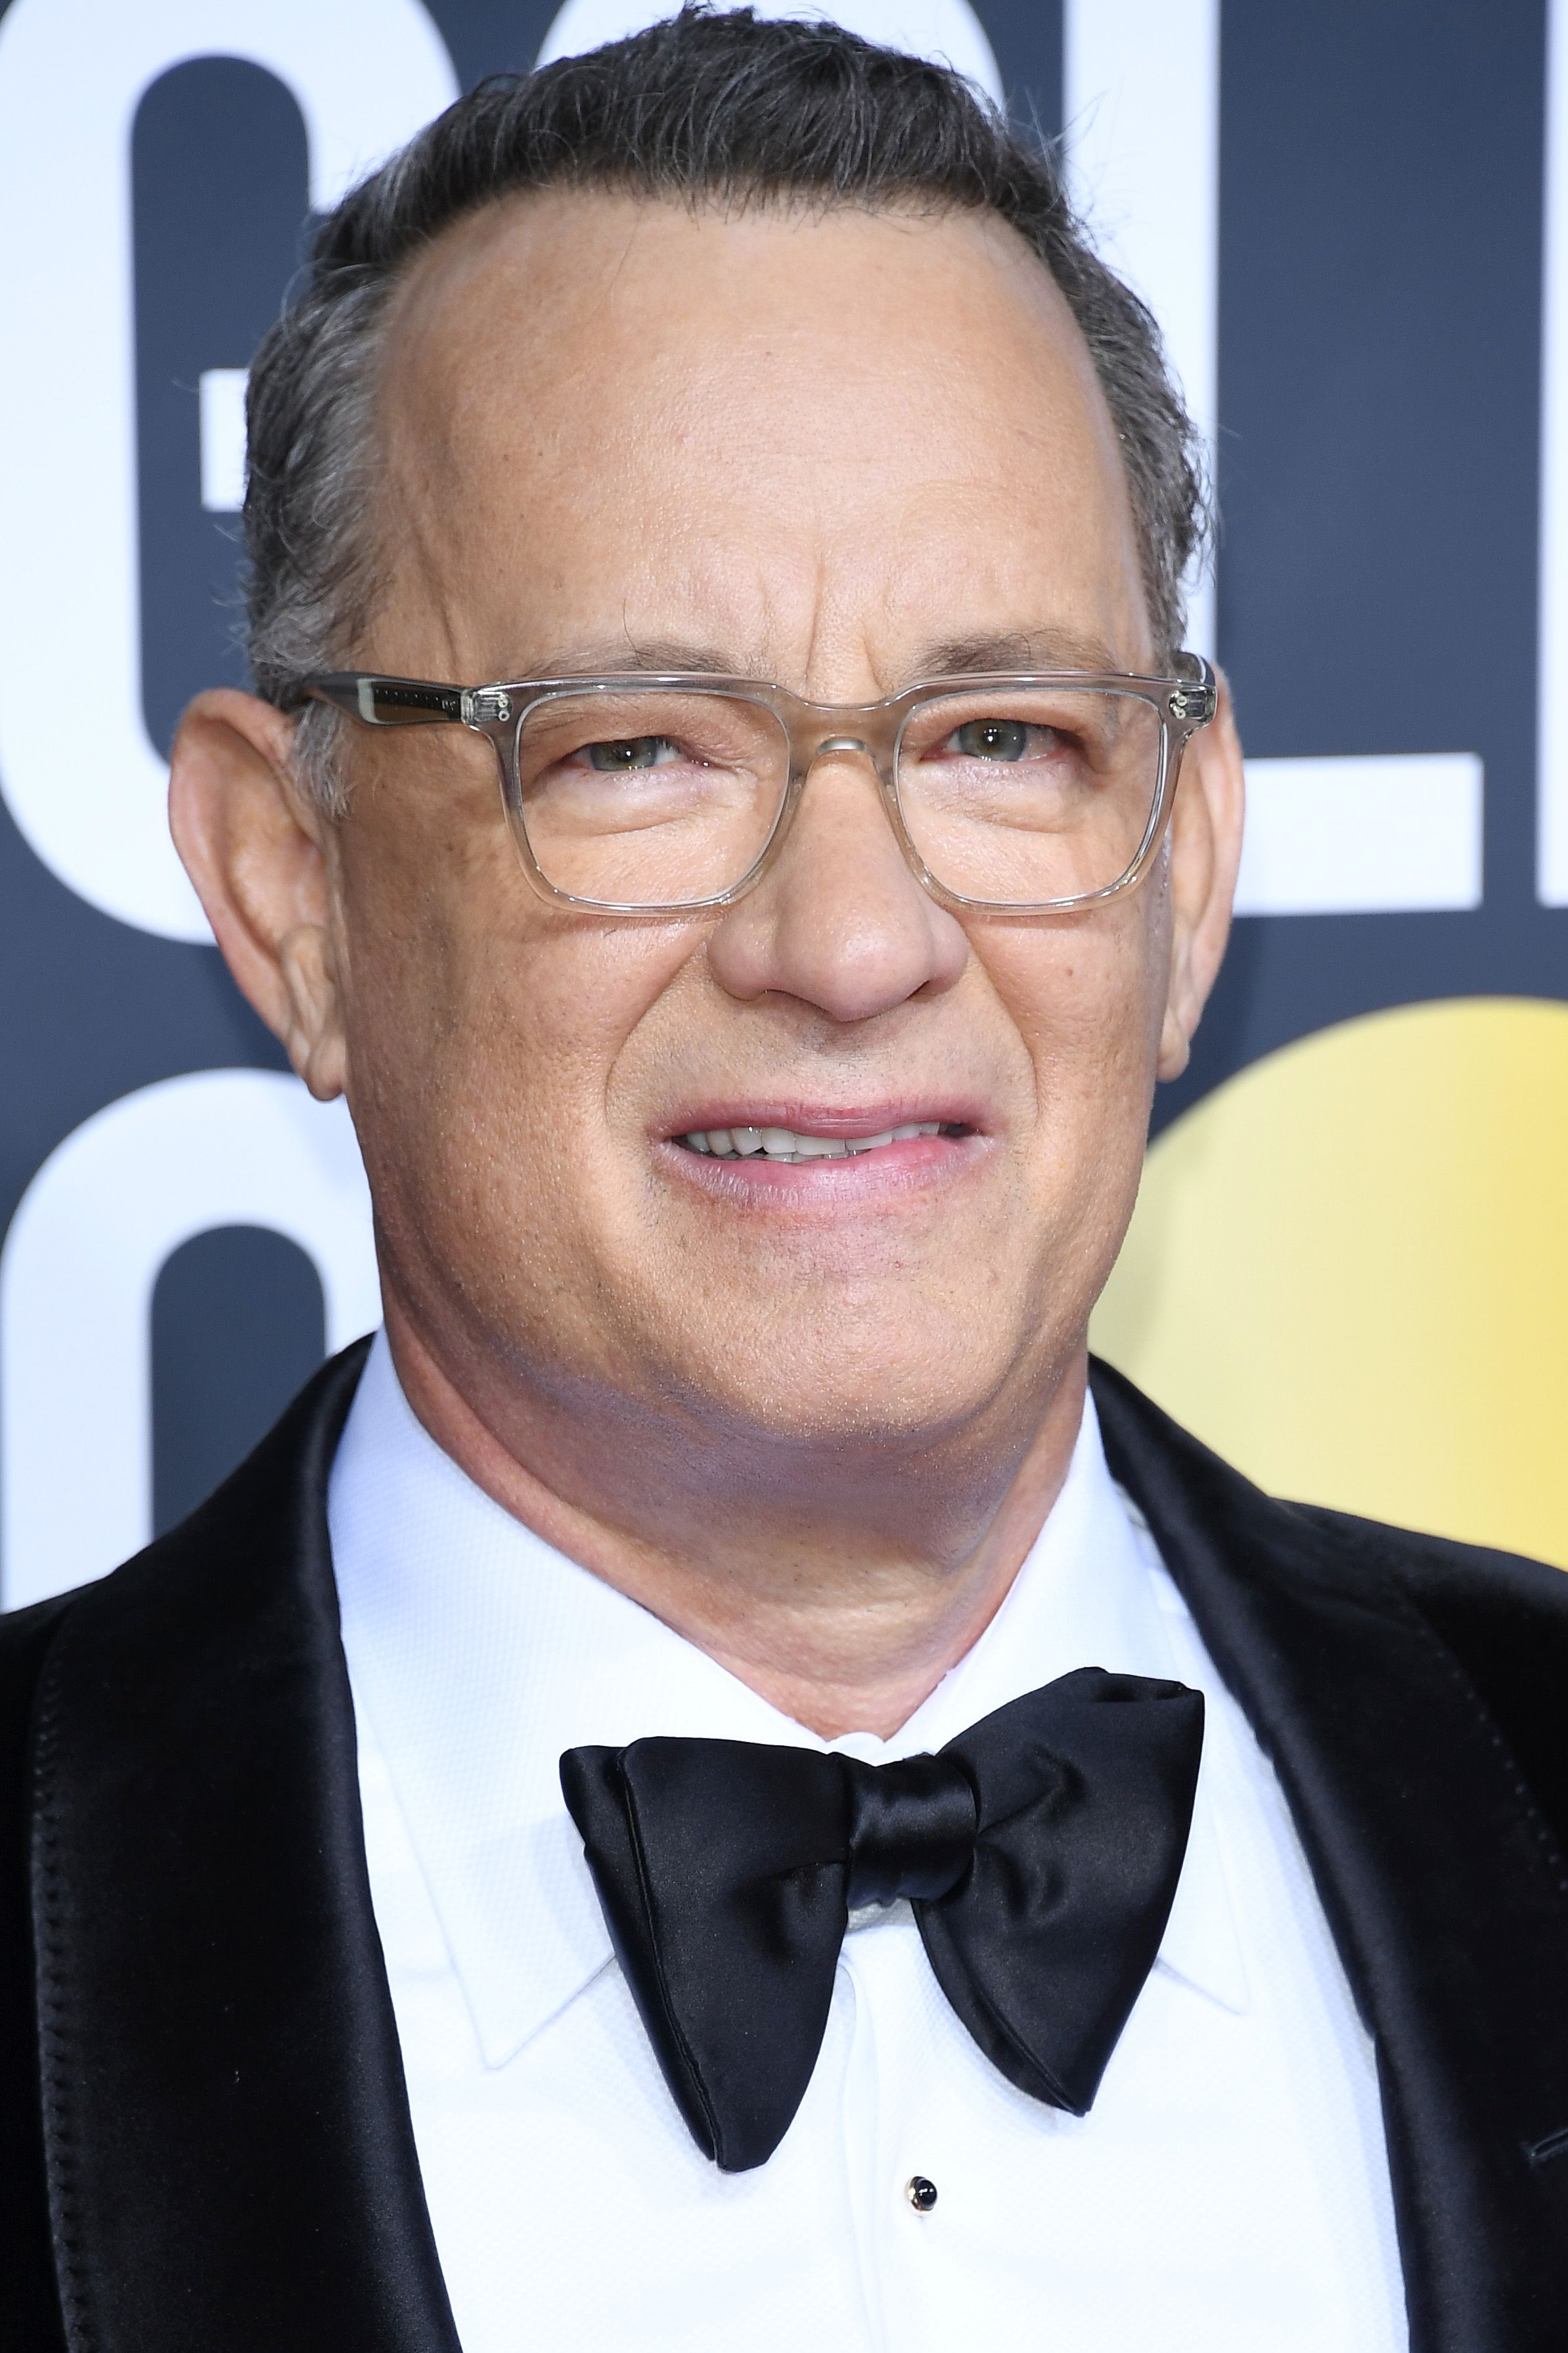 Tom Hanks at the 77th Annual Golden Globe Awards at The Beverly Hilton Hotel on January 05, 2020. | Photo: Getty Images